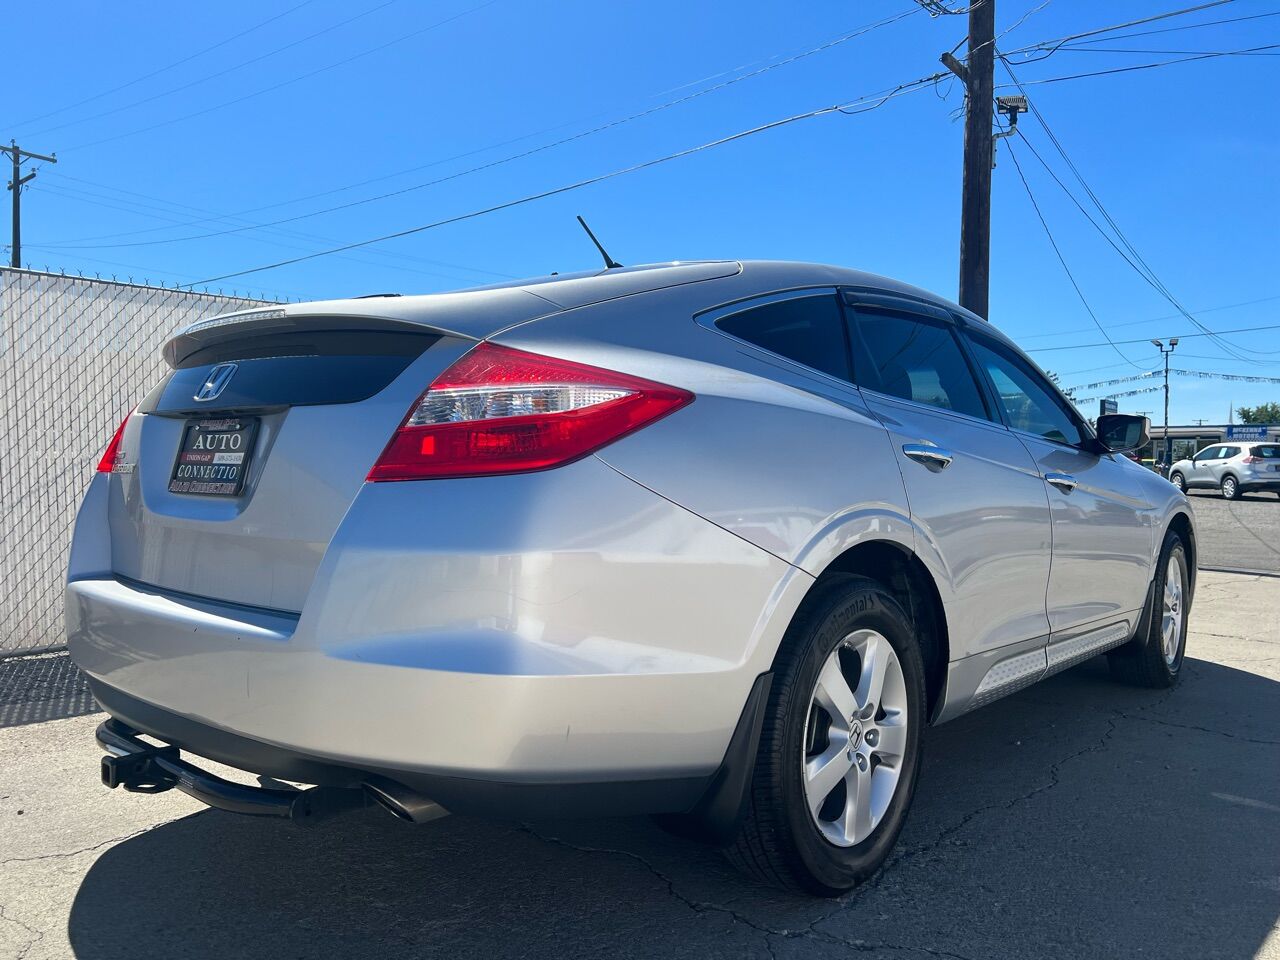 Preowned 2010 HONDA Accord Crosstour EX 4dr Crossover for sale by Auto Connection in Union Gap, WA